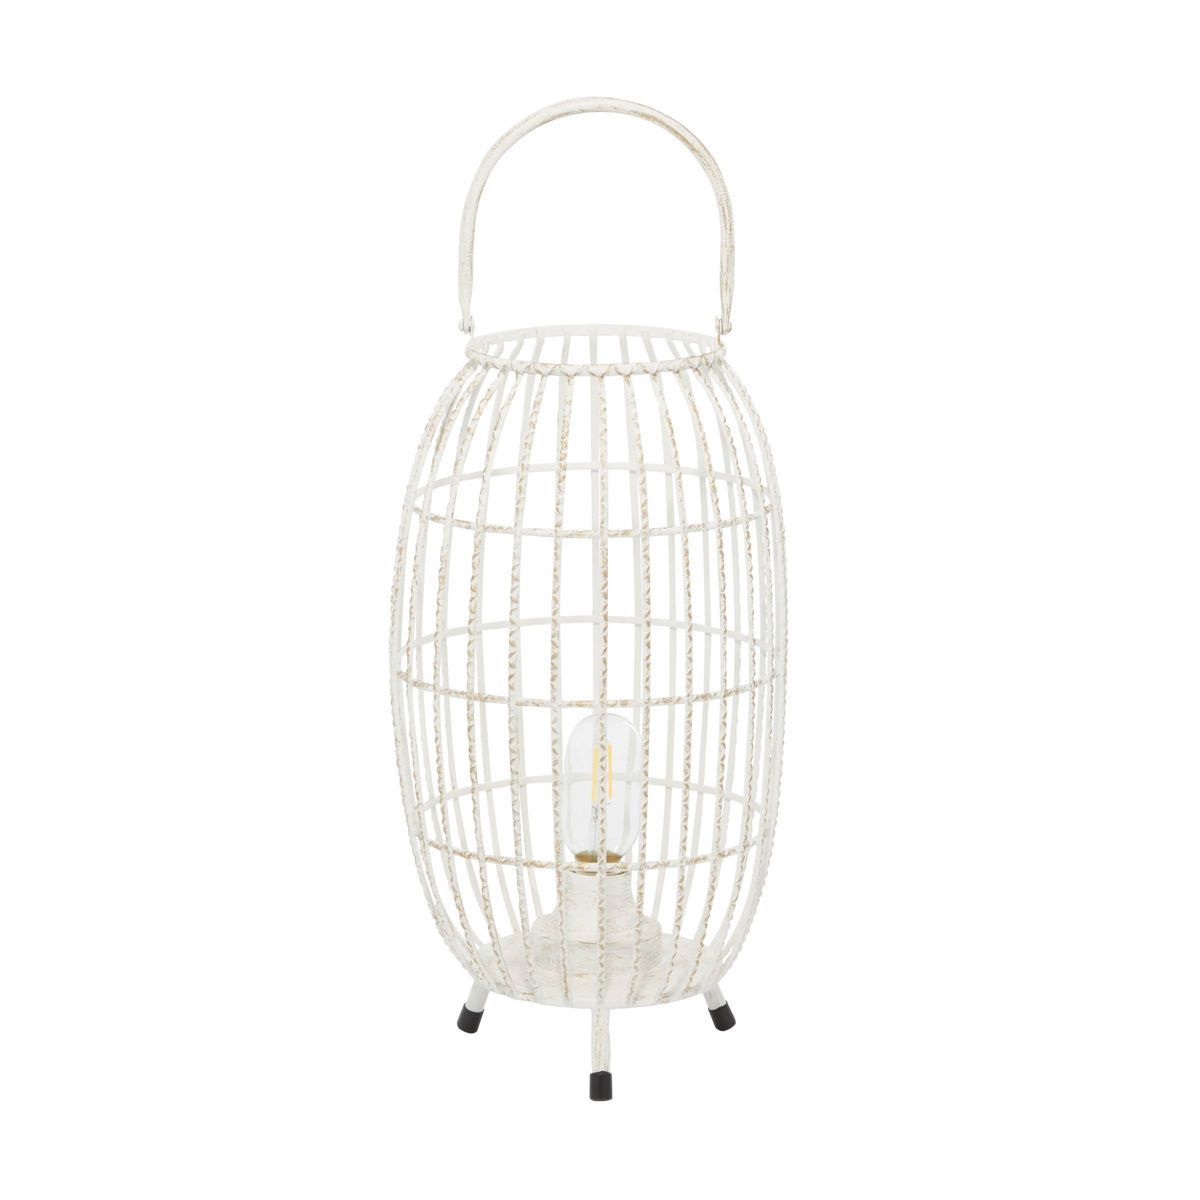 16" x 8.5" Oval Modern Metal Caged Candle Holder with Led Light Bulb Center White - Olivia & May | Target